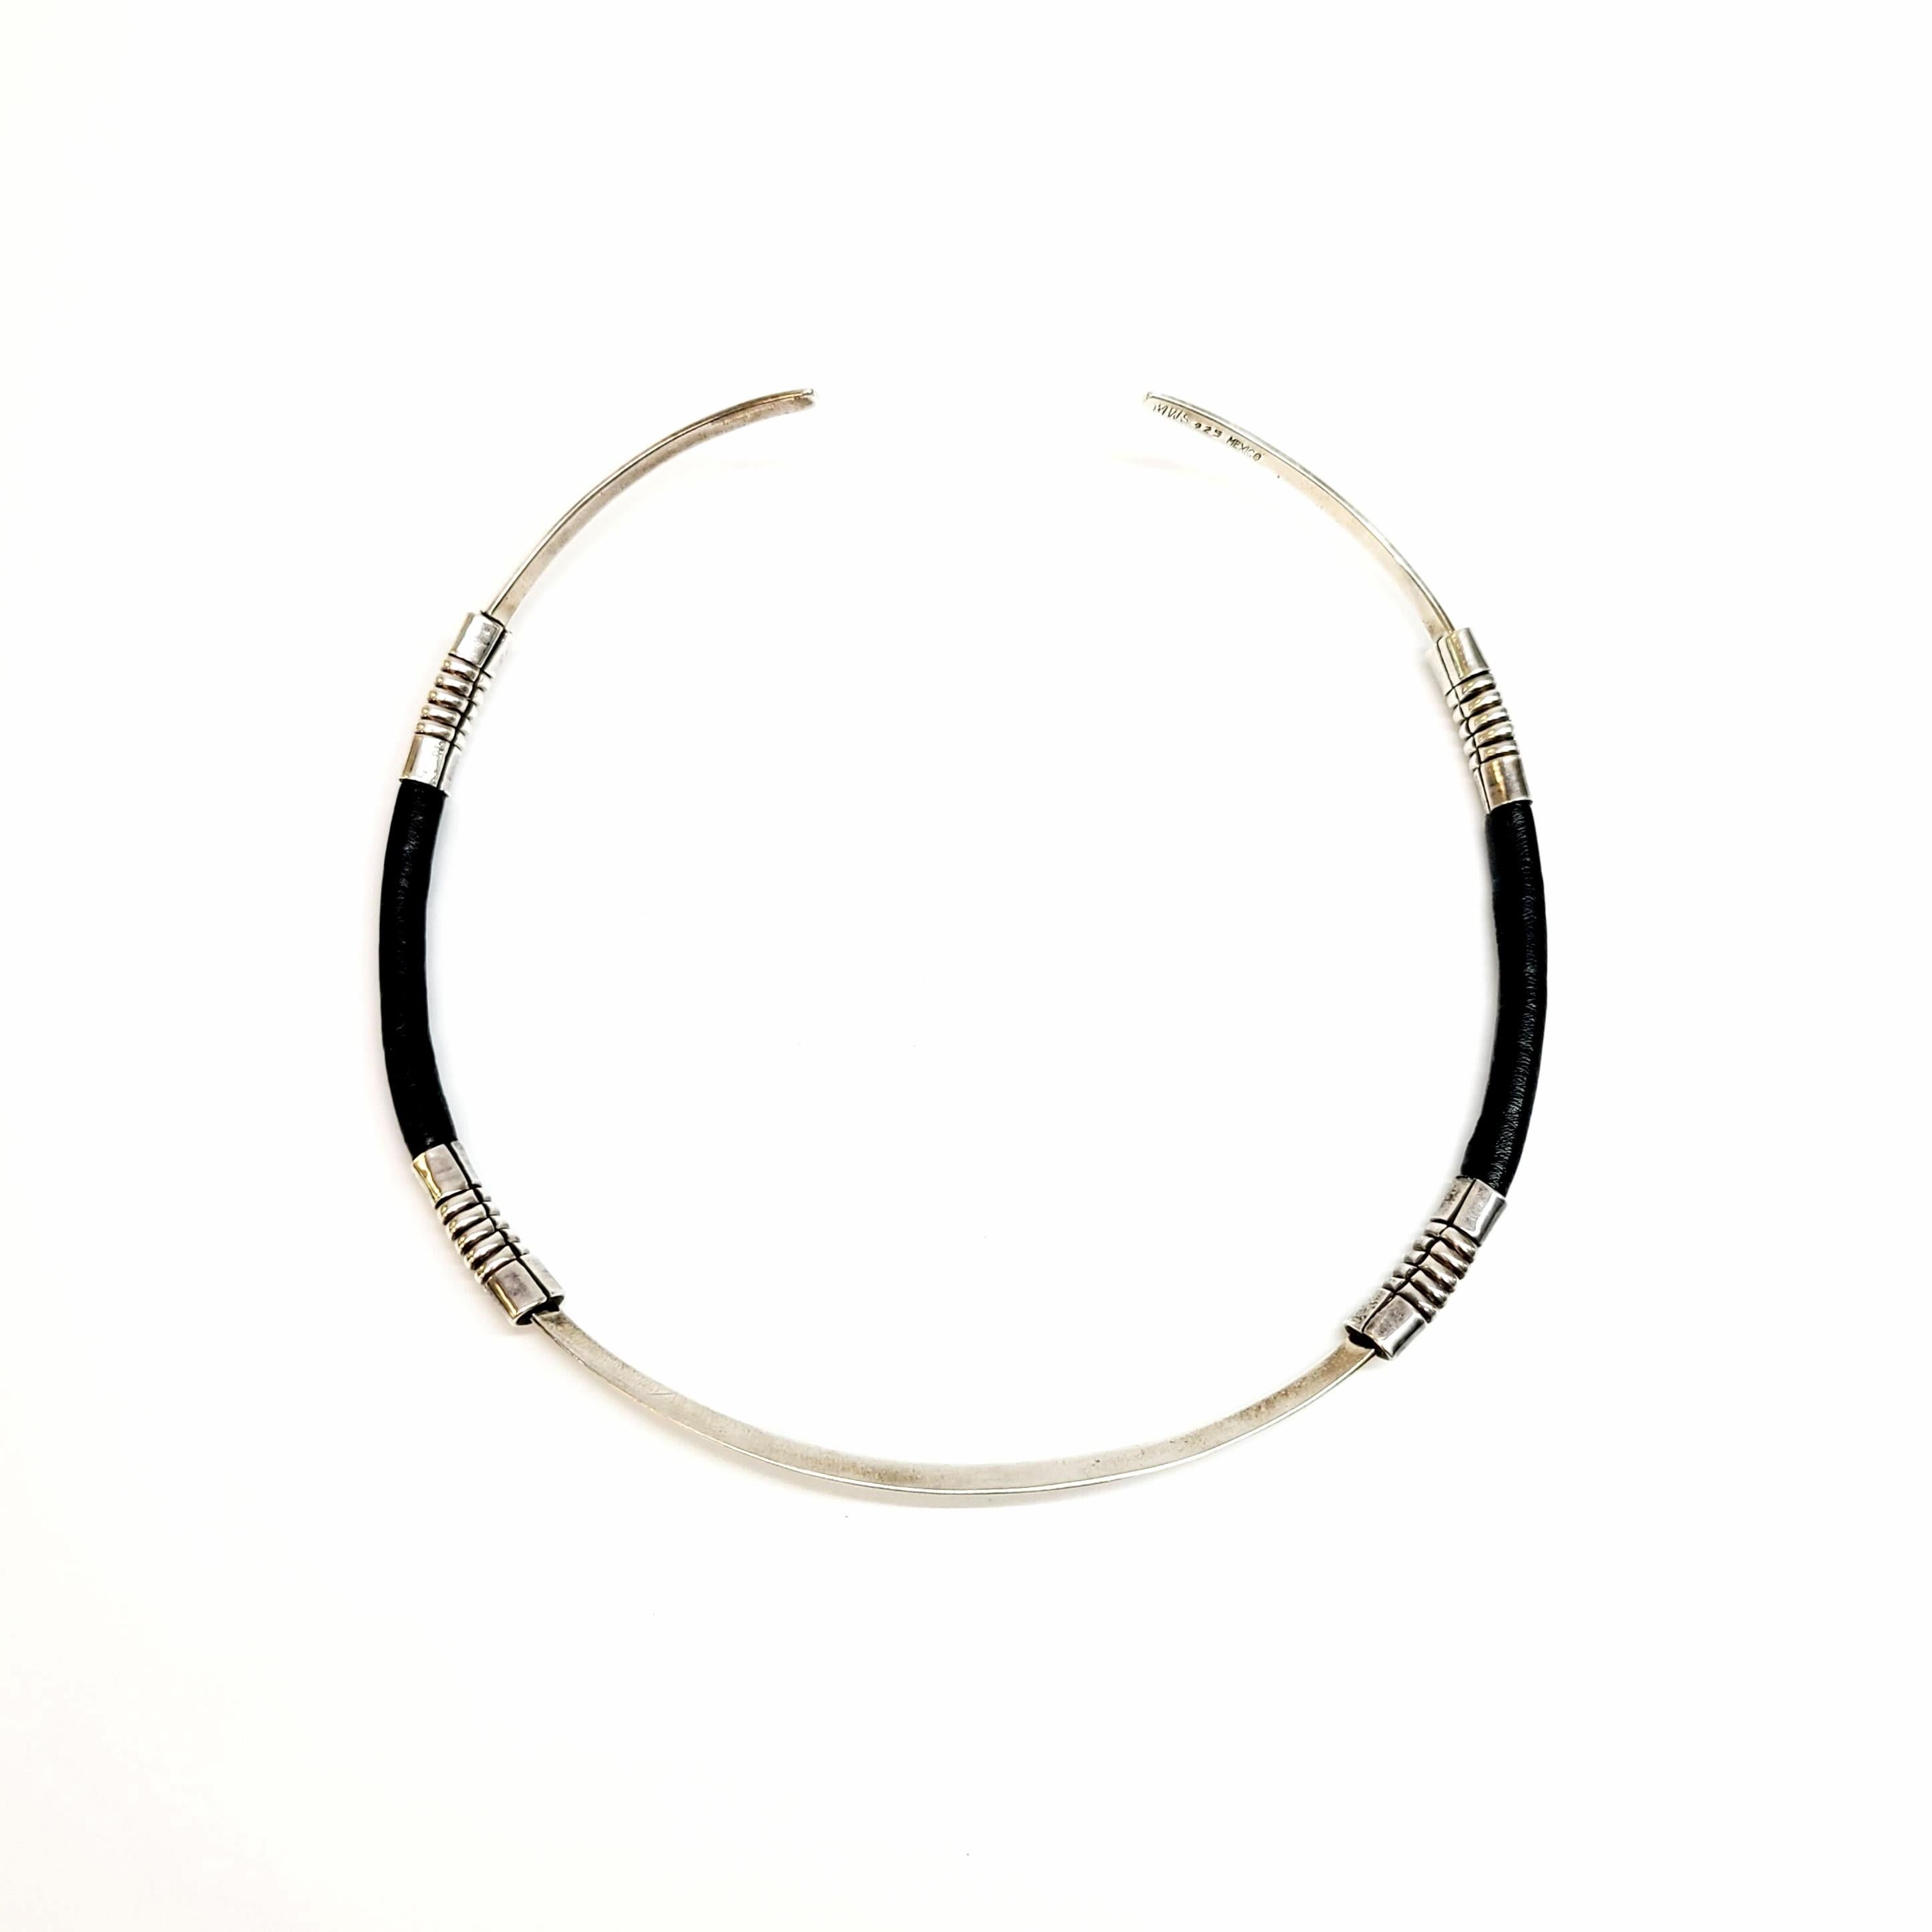 Signed MWS Mexico sterling silver and leather collar necklace.

Signed by Mexican artisan MWS, this piece features black leather wrapped around a thin sterling silver collar necklace with ribbed accents at each of of the leather sections.

Measures